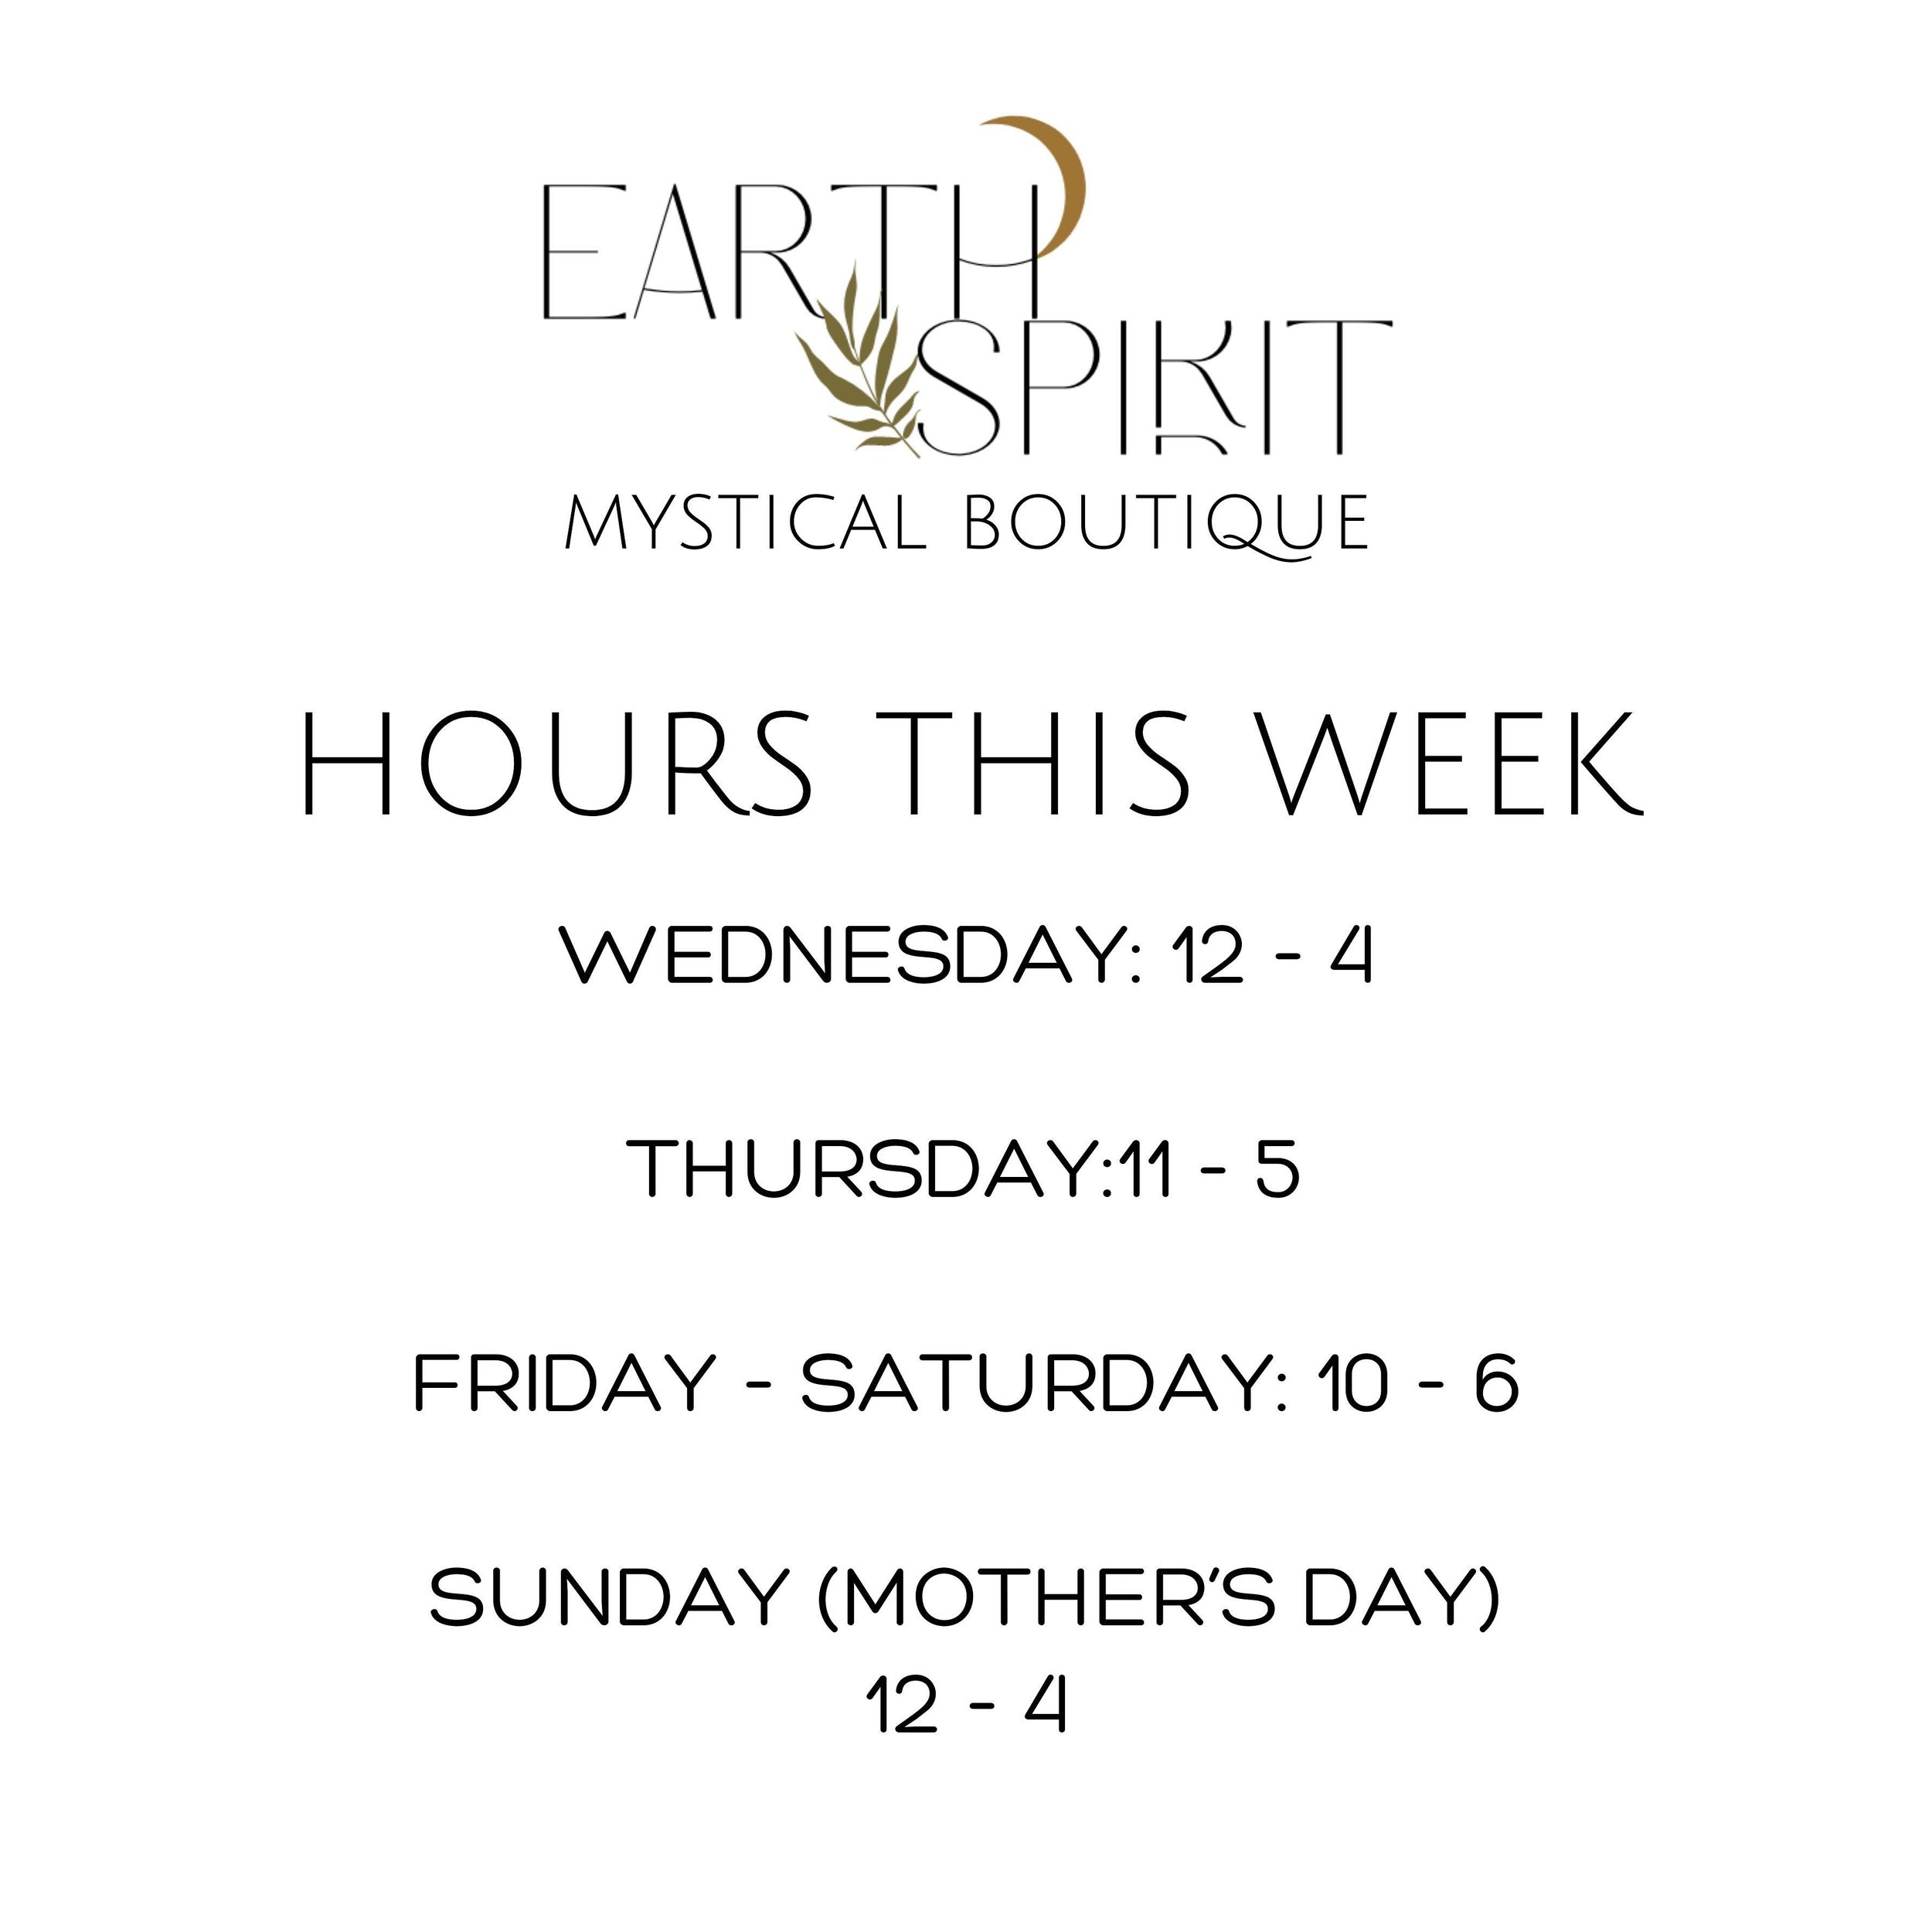 We have some amended hours this week so make sure you check media you head our way. 

Wednesday (today): Noon - 4
Thursday: 11 - 5
Friday: 10 - 6 (maybe 7 if we still have peony bouquets)
Saturday: 10 - 6
Sunday (Mother&rsquo;s Day): Noon - 4

#earth